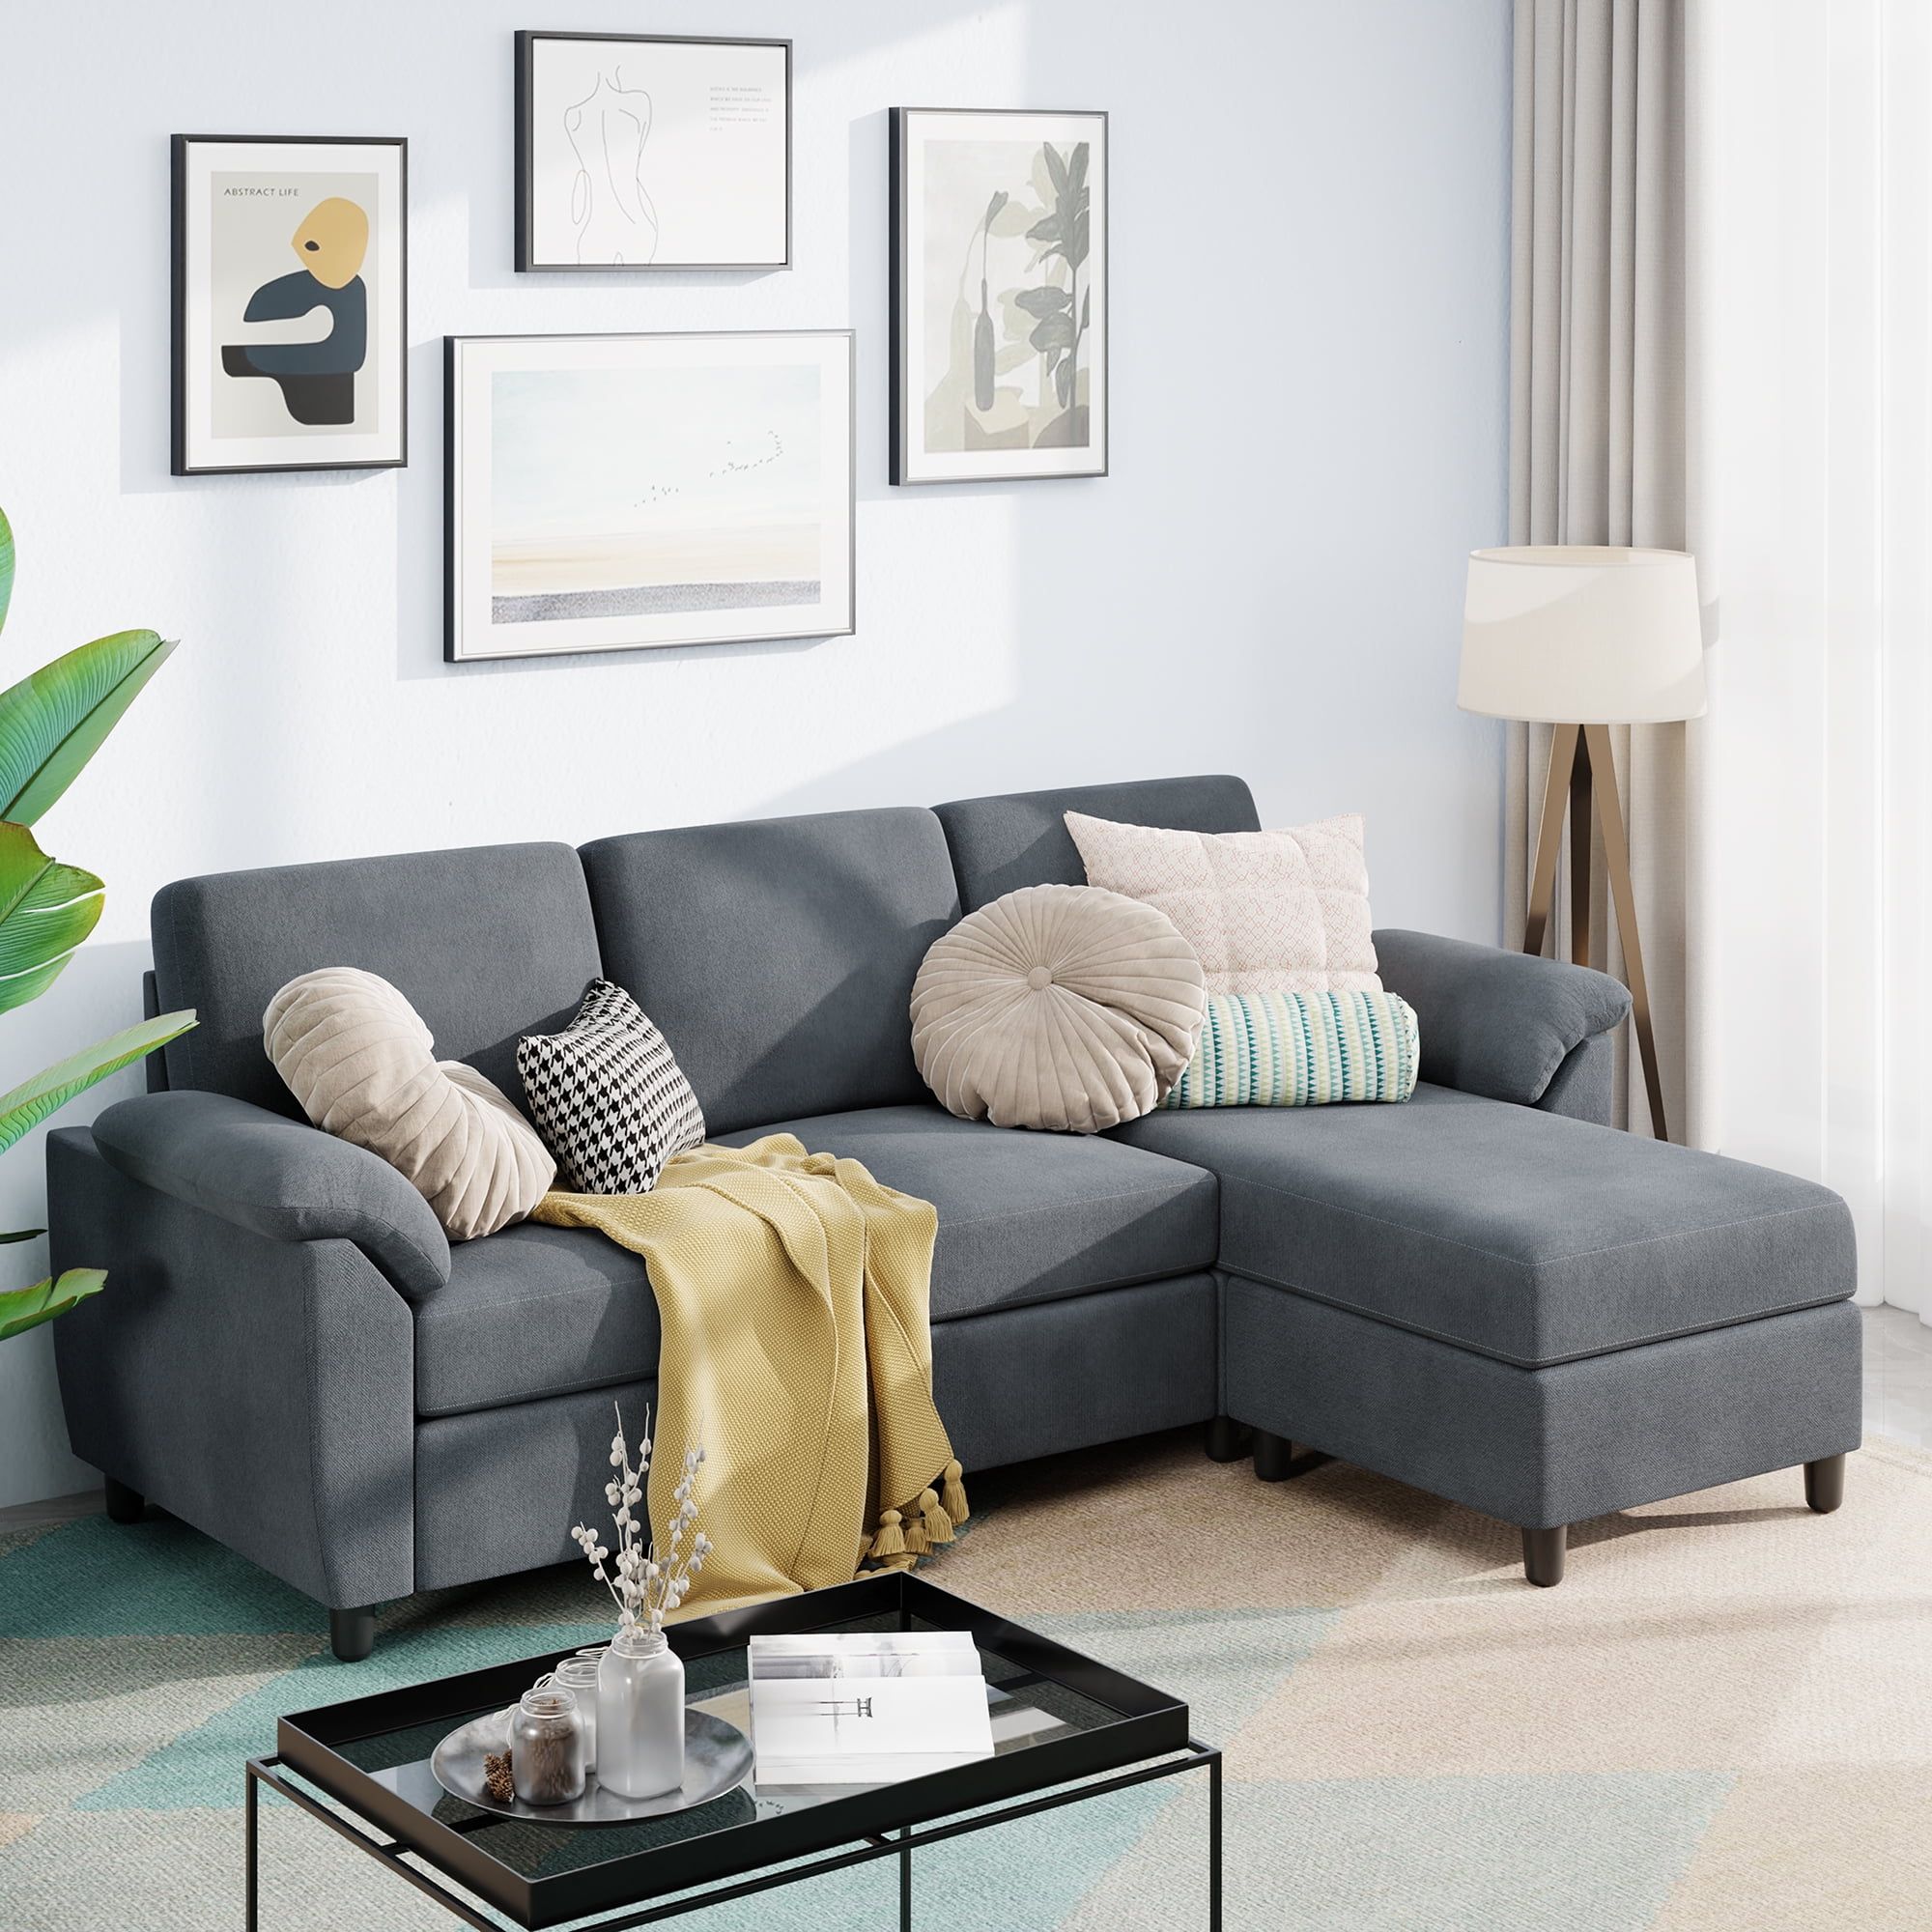 Sobaniilo 79" Convertible Sectional Sofa Couch, 3 Seat L Shaped Sofa With  Removable Pillows Linen Fabric Small Couch Mid Century For Living Room,  Apartment And Office (gray) – Walmart Intended For 3 Seat Convertible Sectional Sofas (Photo 5 of 15)